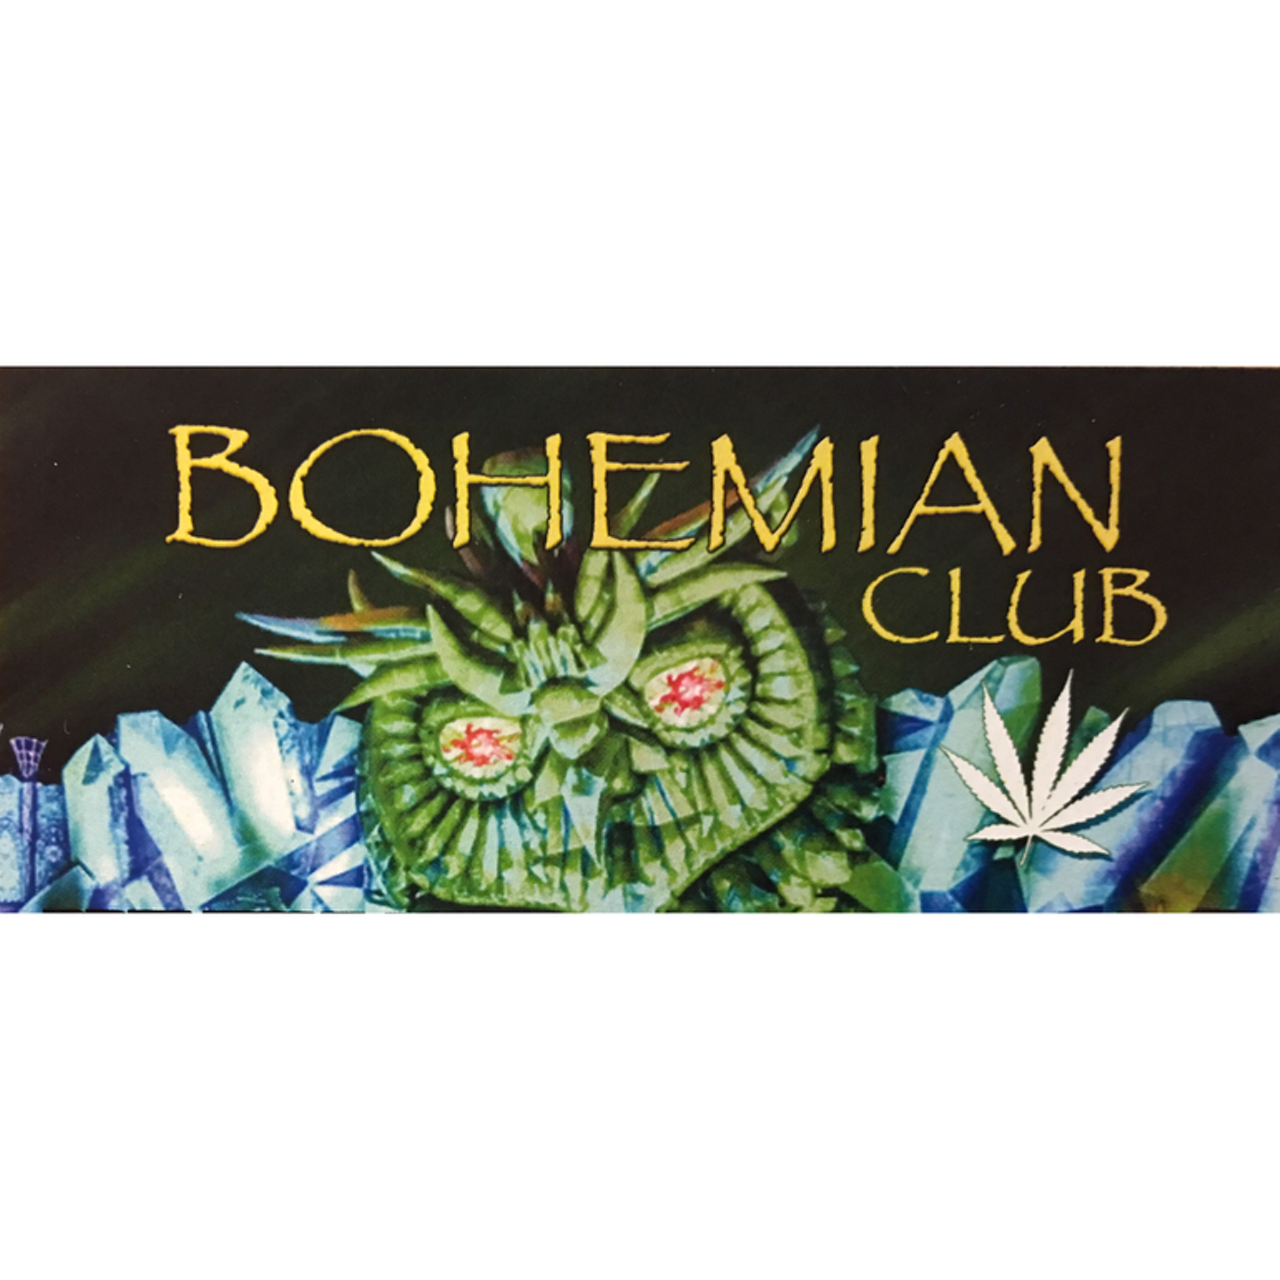 Bohemian Club
24251 W McNichols Rd, Detroit, MI 48219
(313) 744-9667
Channel your inner hippy here on the westside at the Bohemian club. Great vibes, flowers, and concentrates that will have you feeling groovy in no time.